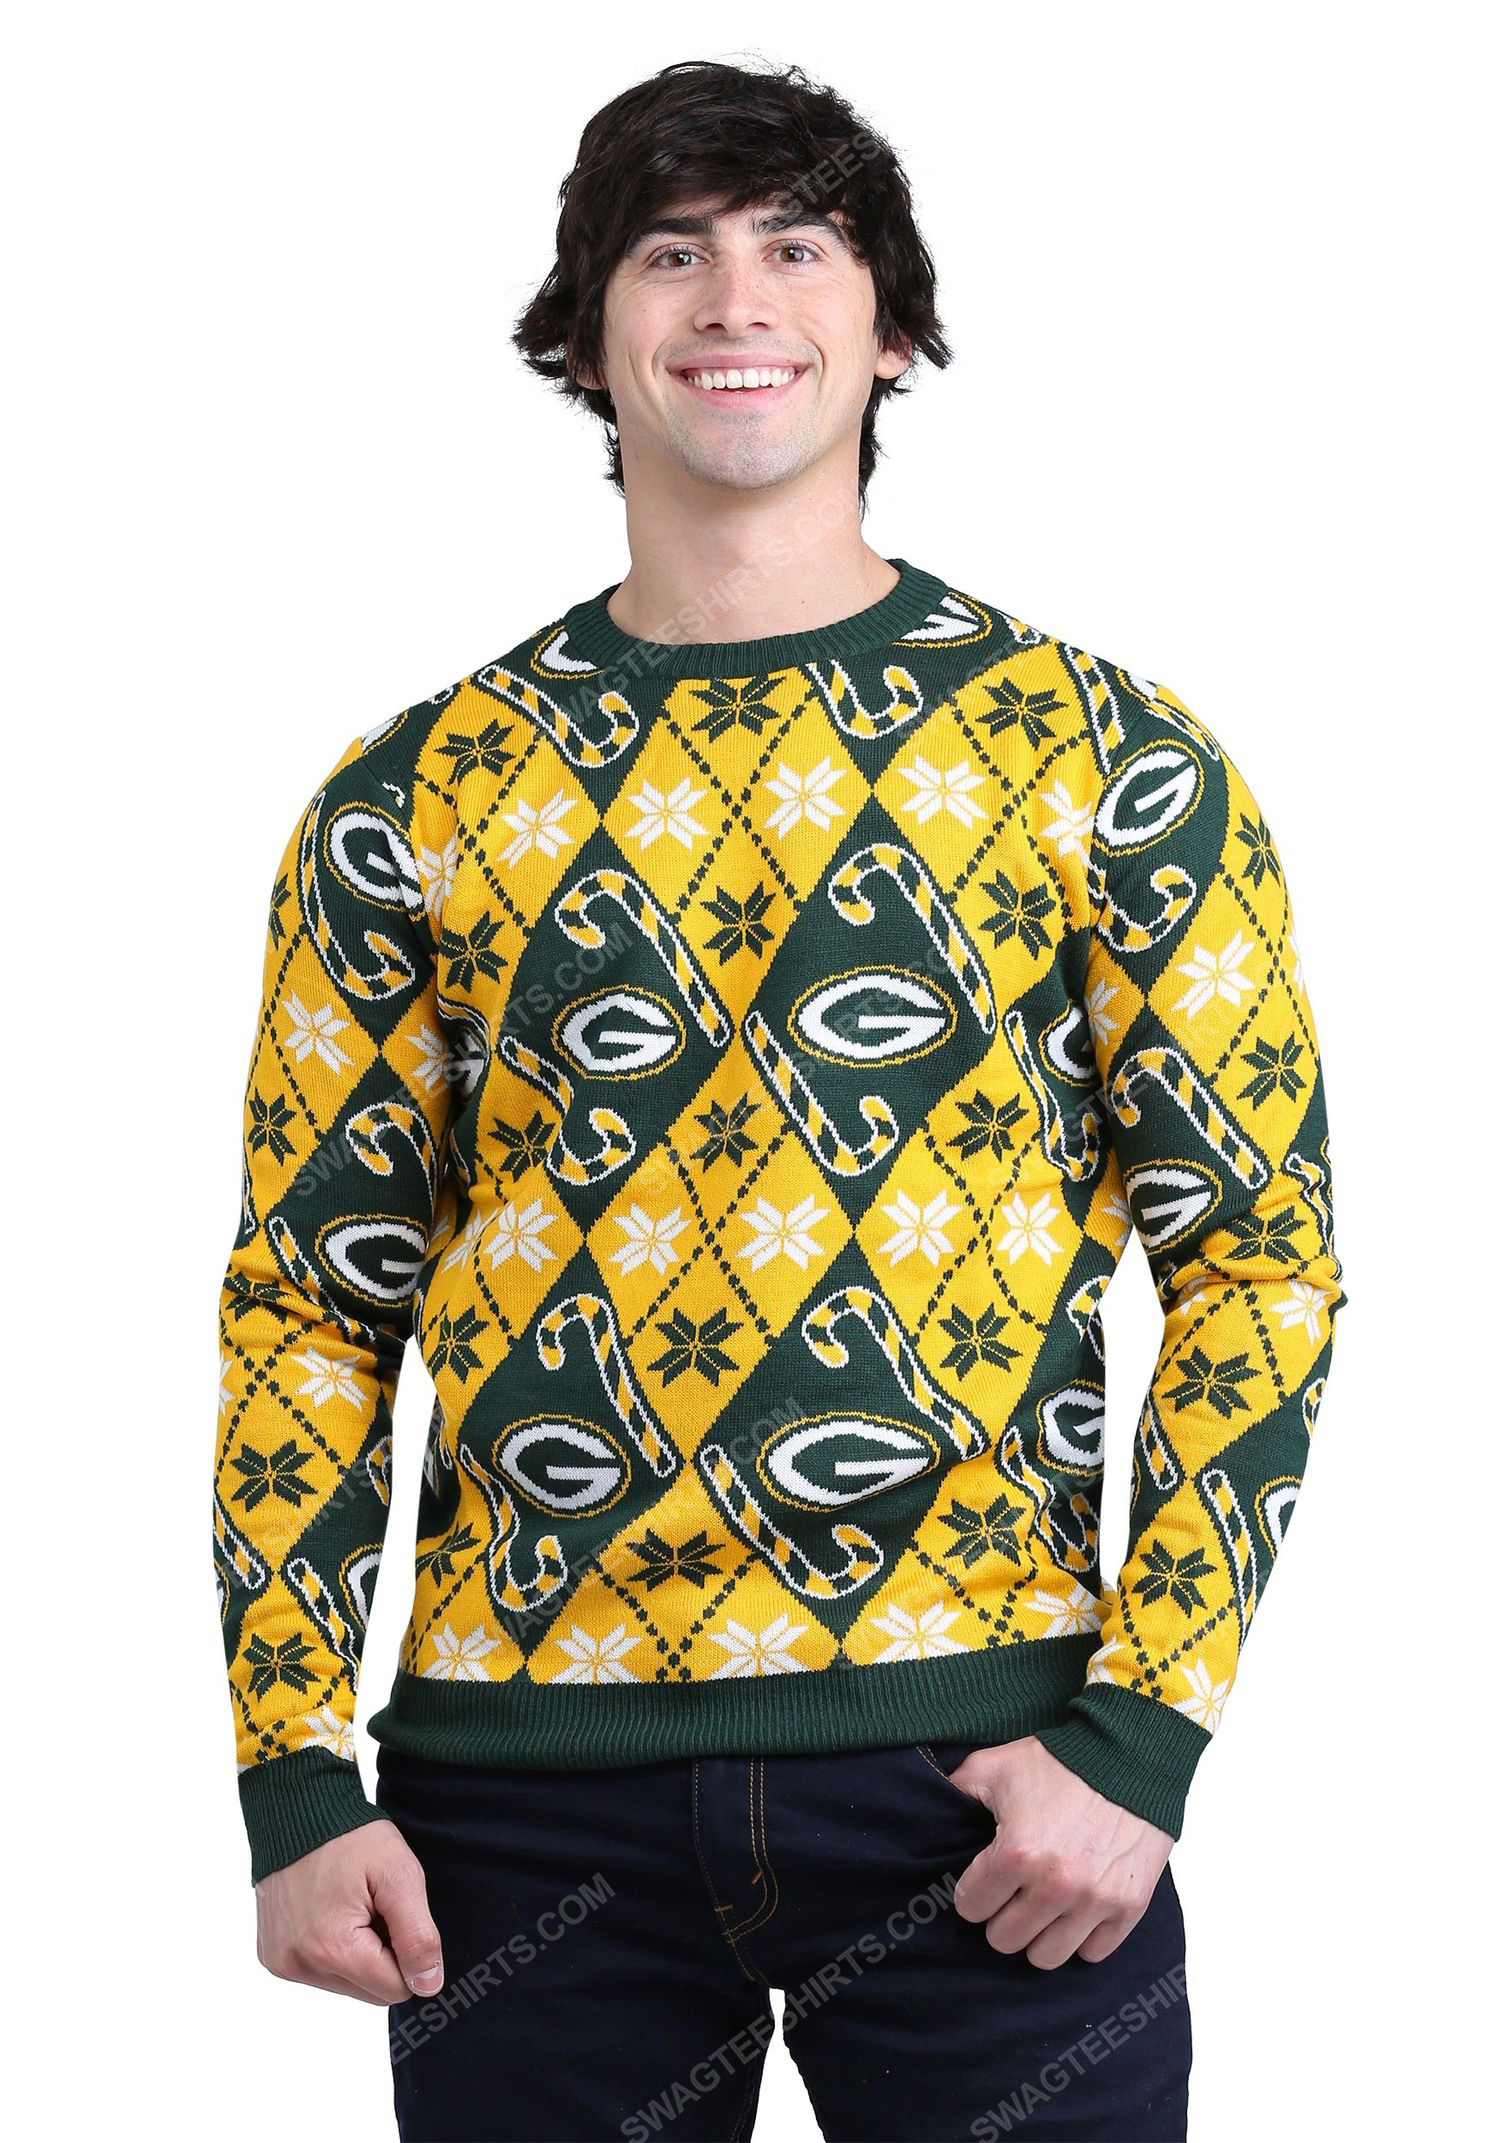 Green bay packers candy cane full print ugly christmas sweater 2